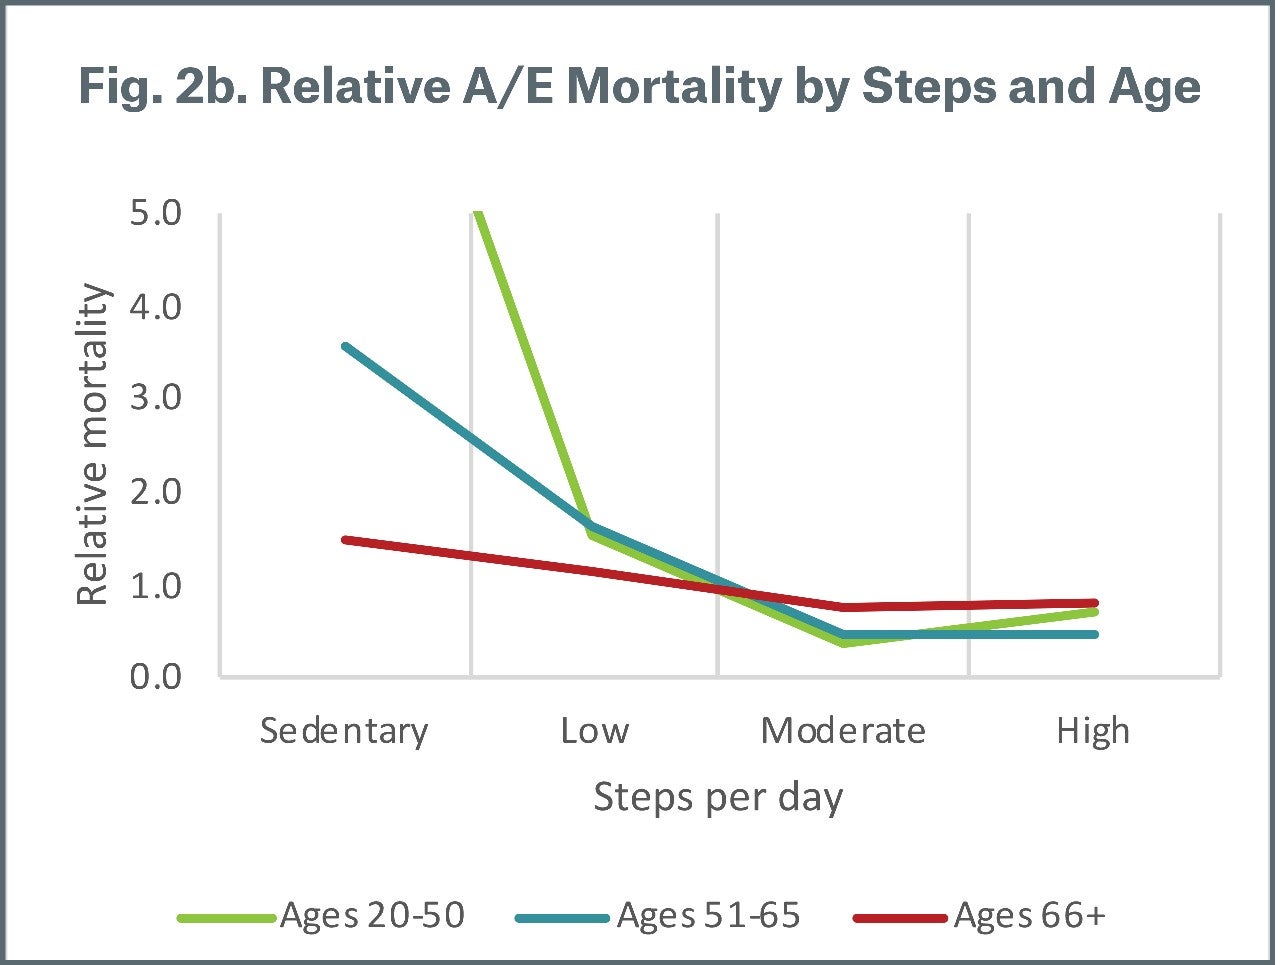 Figure 2b Relative A/E Mortality by Steps and Age